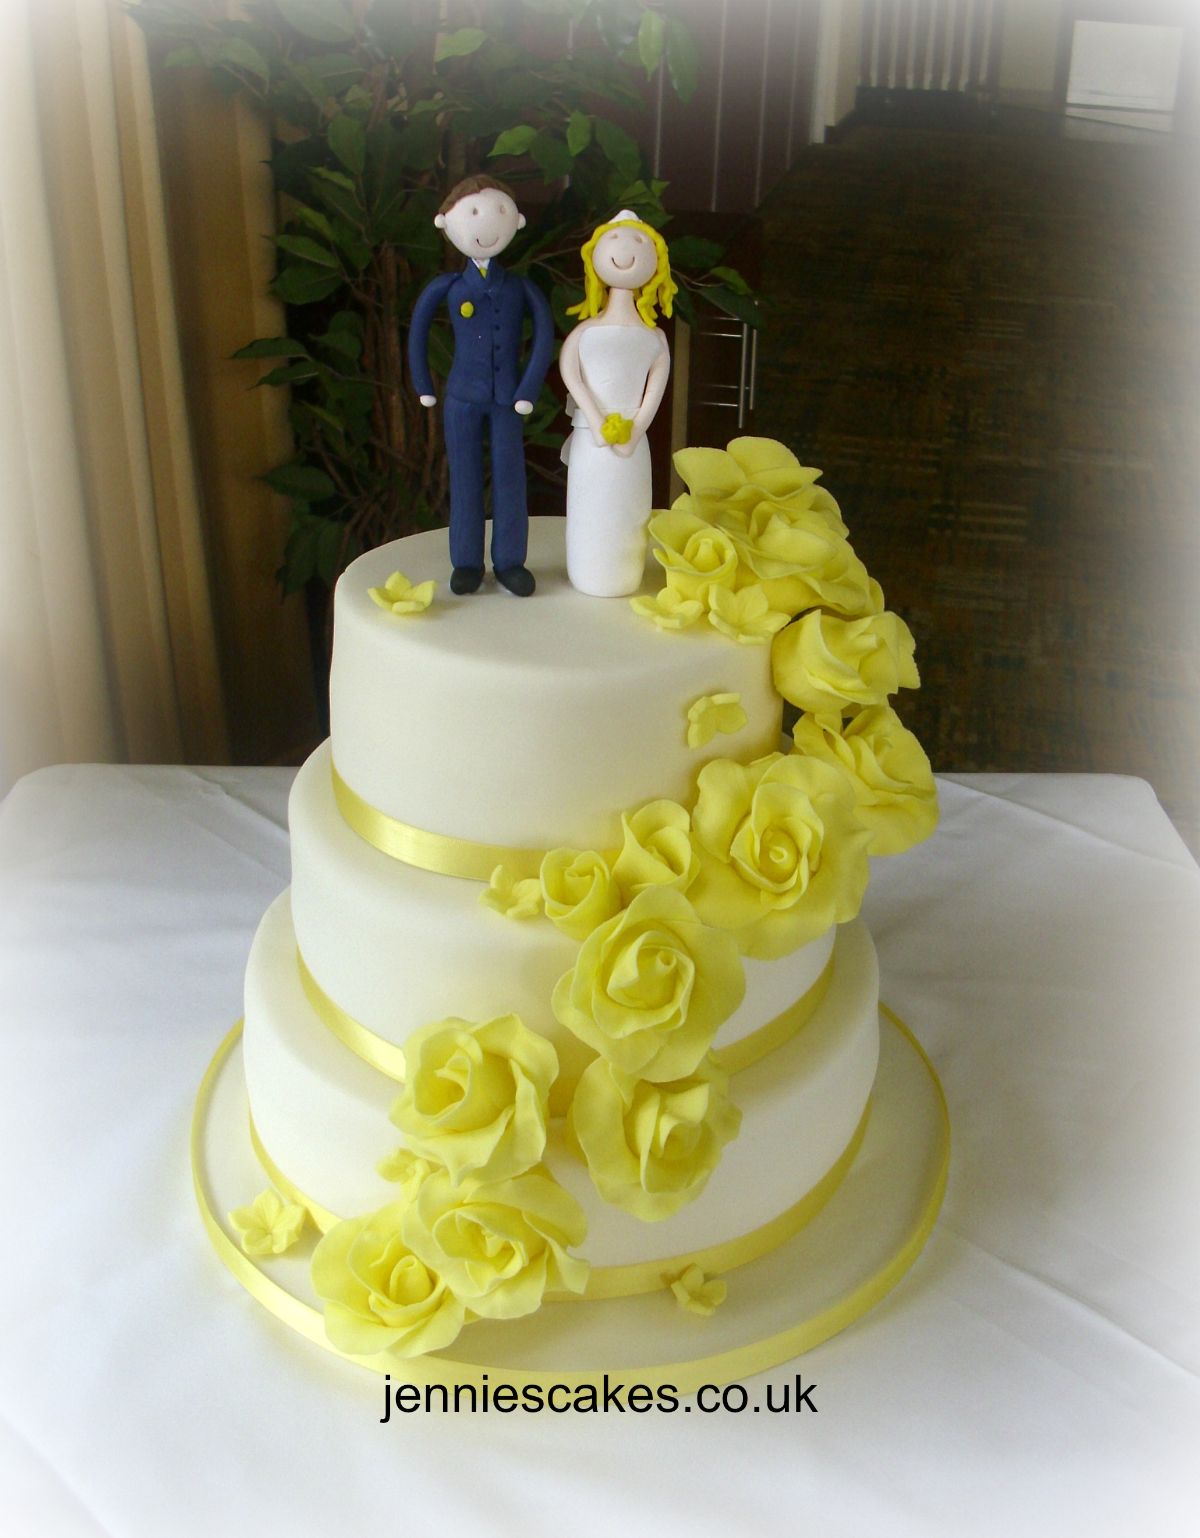 Jennie's cake's and catering-Image-62